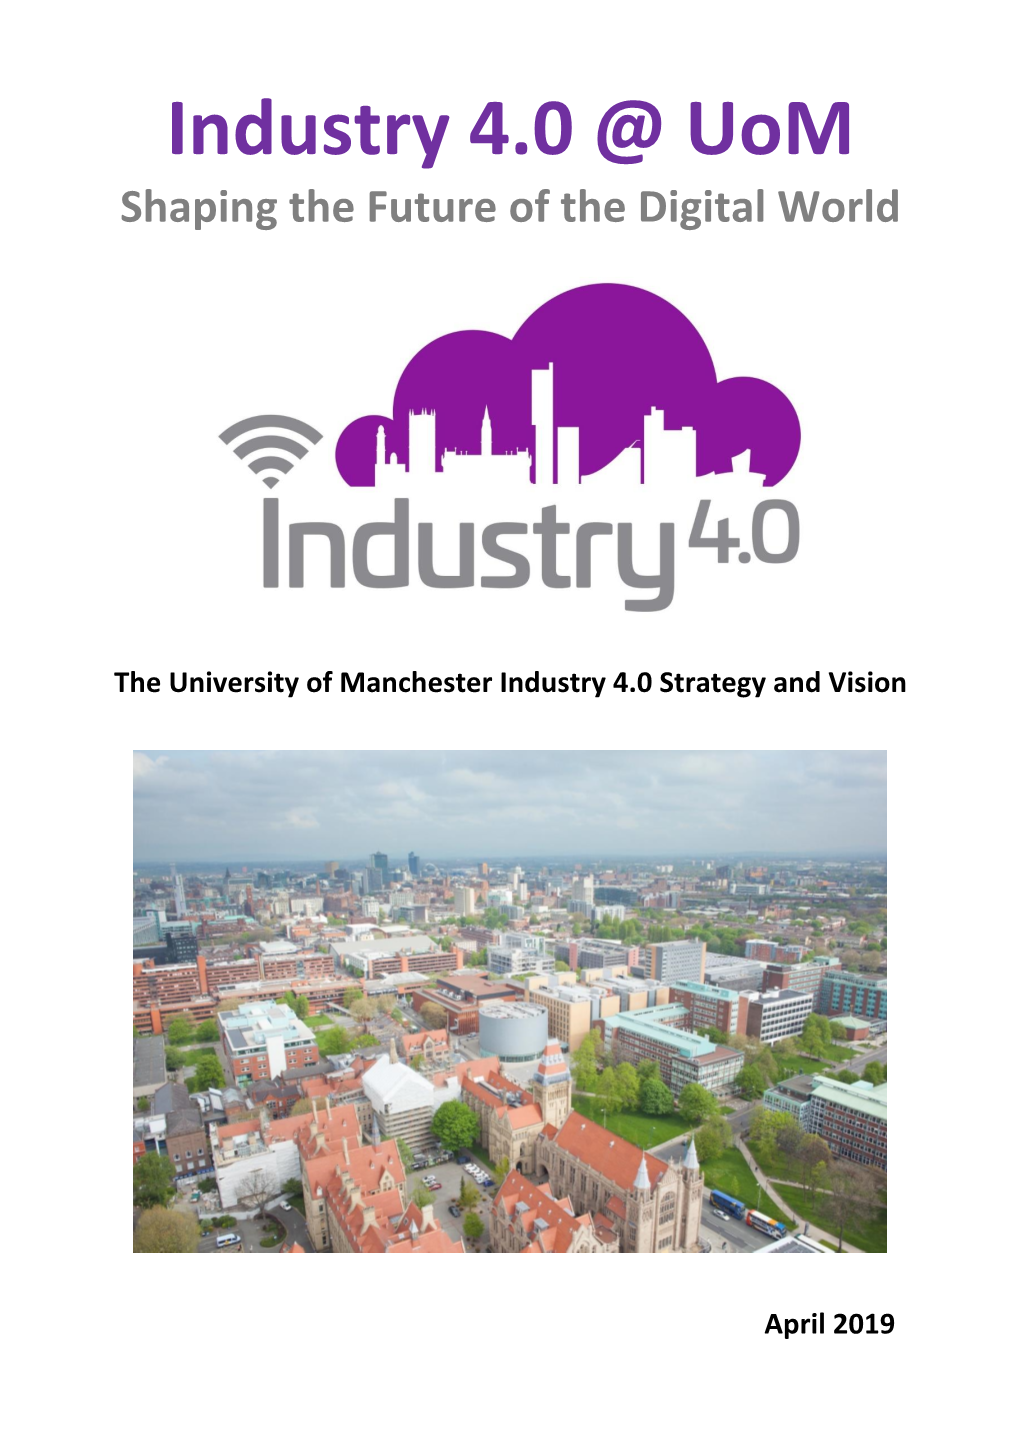 Industry 4.0 @ Uom Shaping the Future of the Digital World